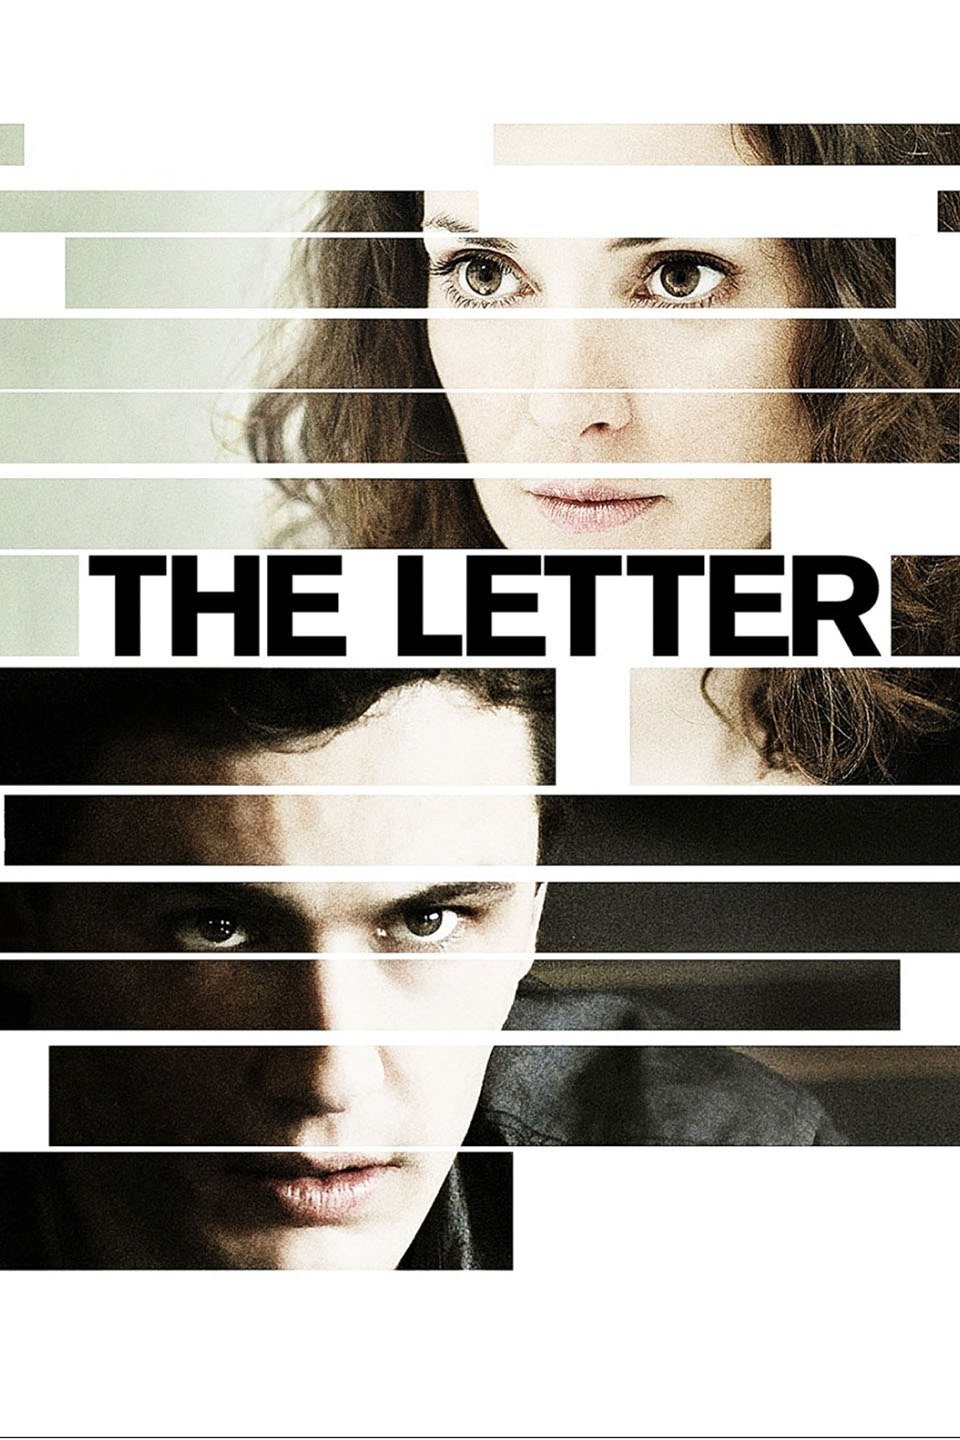 The Letter (2012) - Rotten Tomatoes